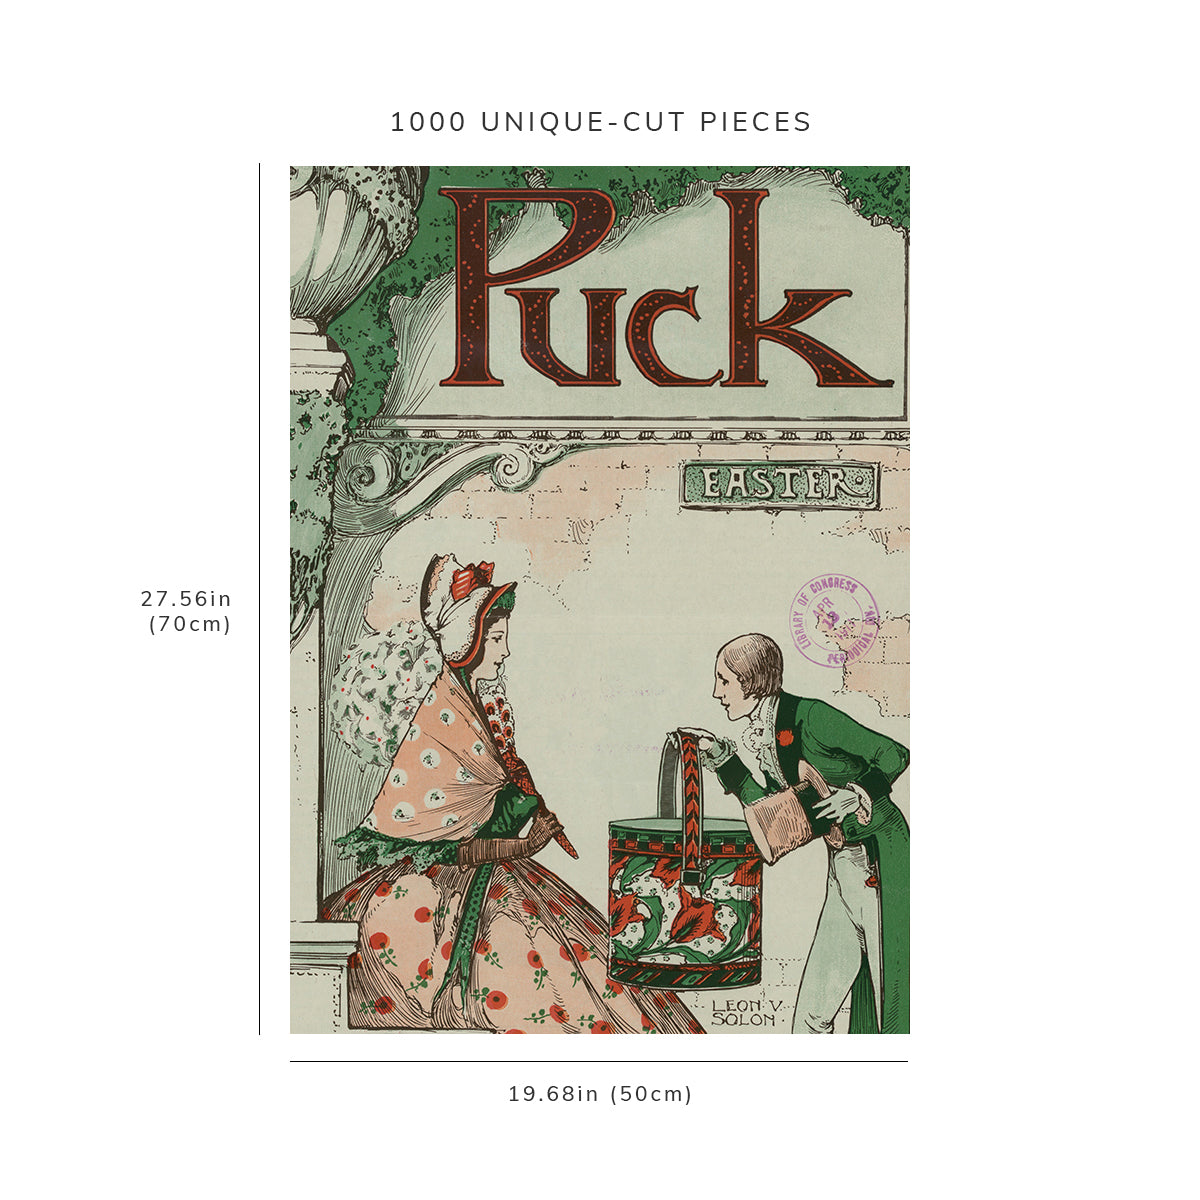 1000 piece puzzle - 1911 | Puck Easter | Leon Victor Solon | men presenting large hat box to a woman